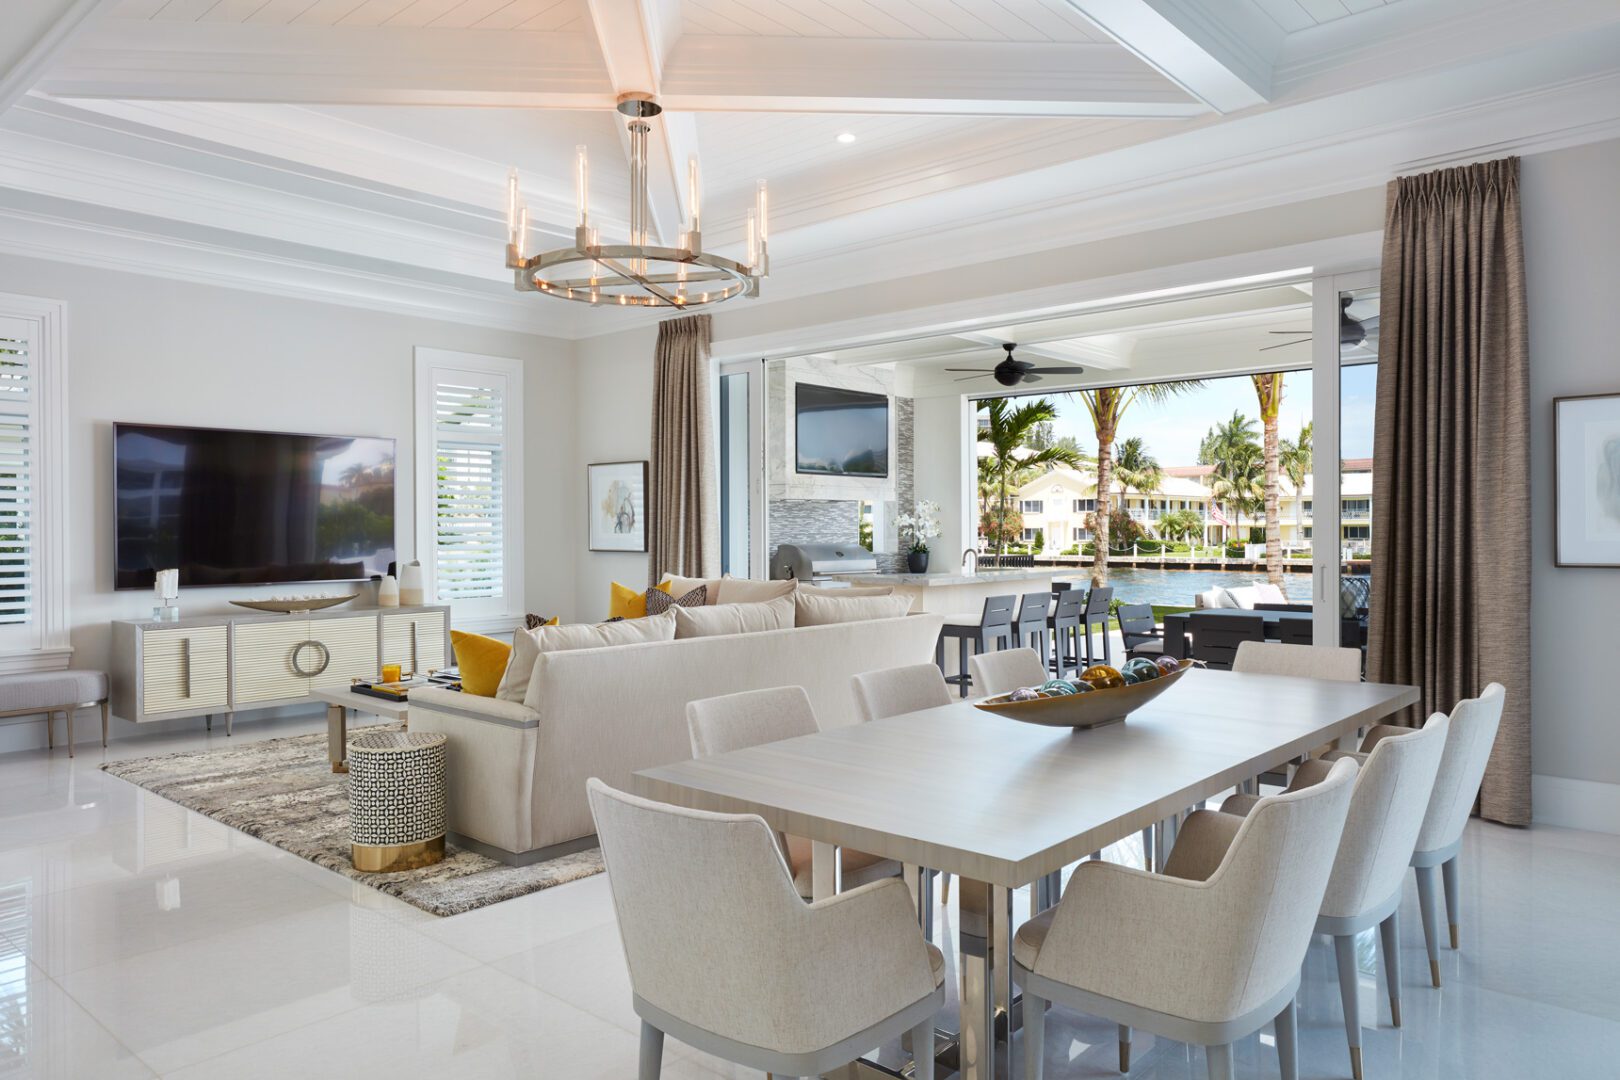 A living room with white furniture and a large open floor plan.